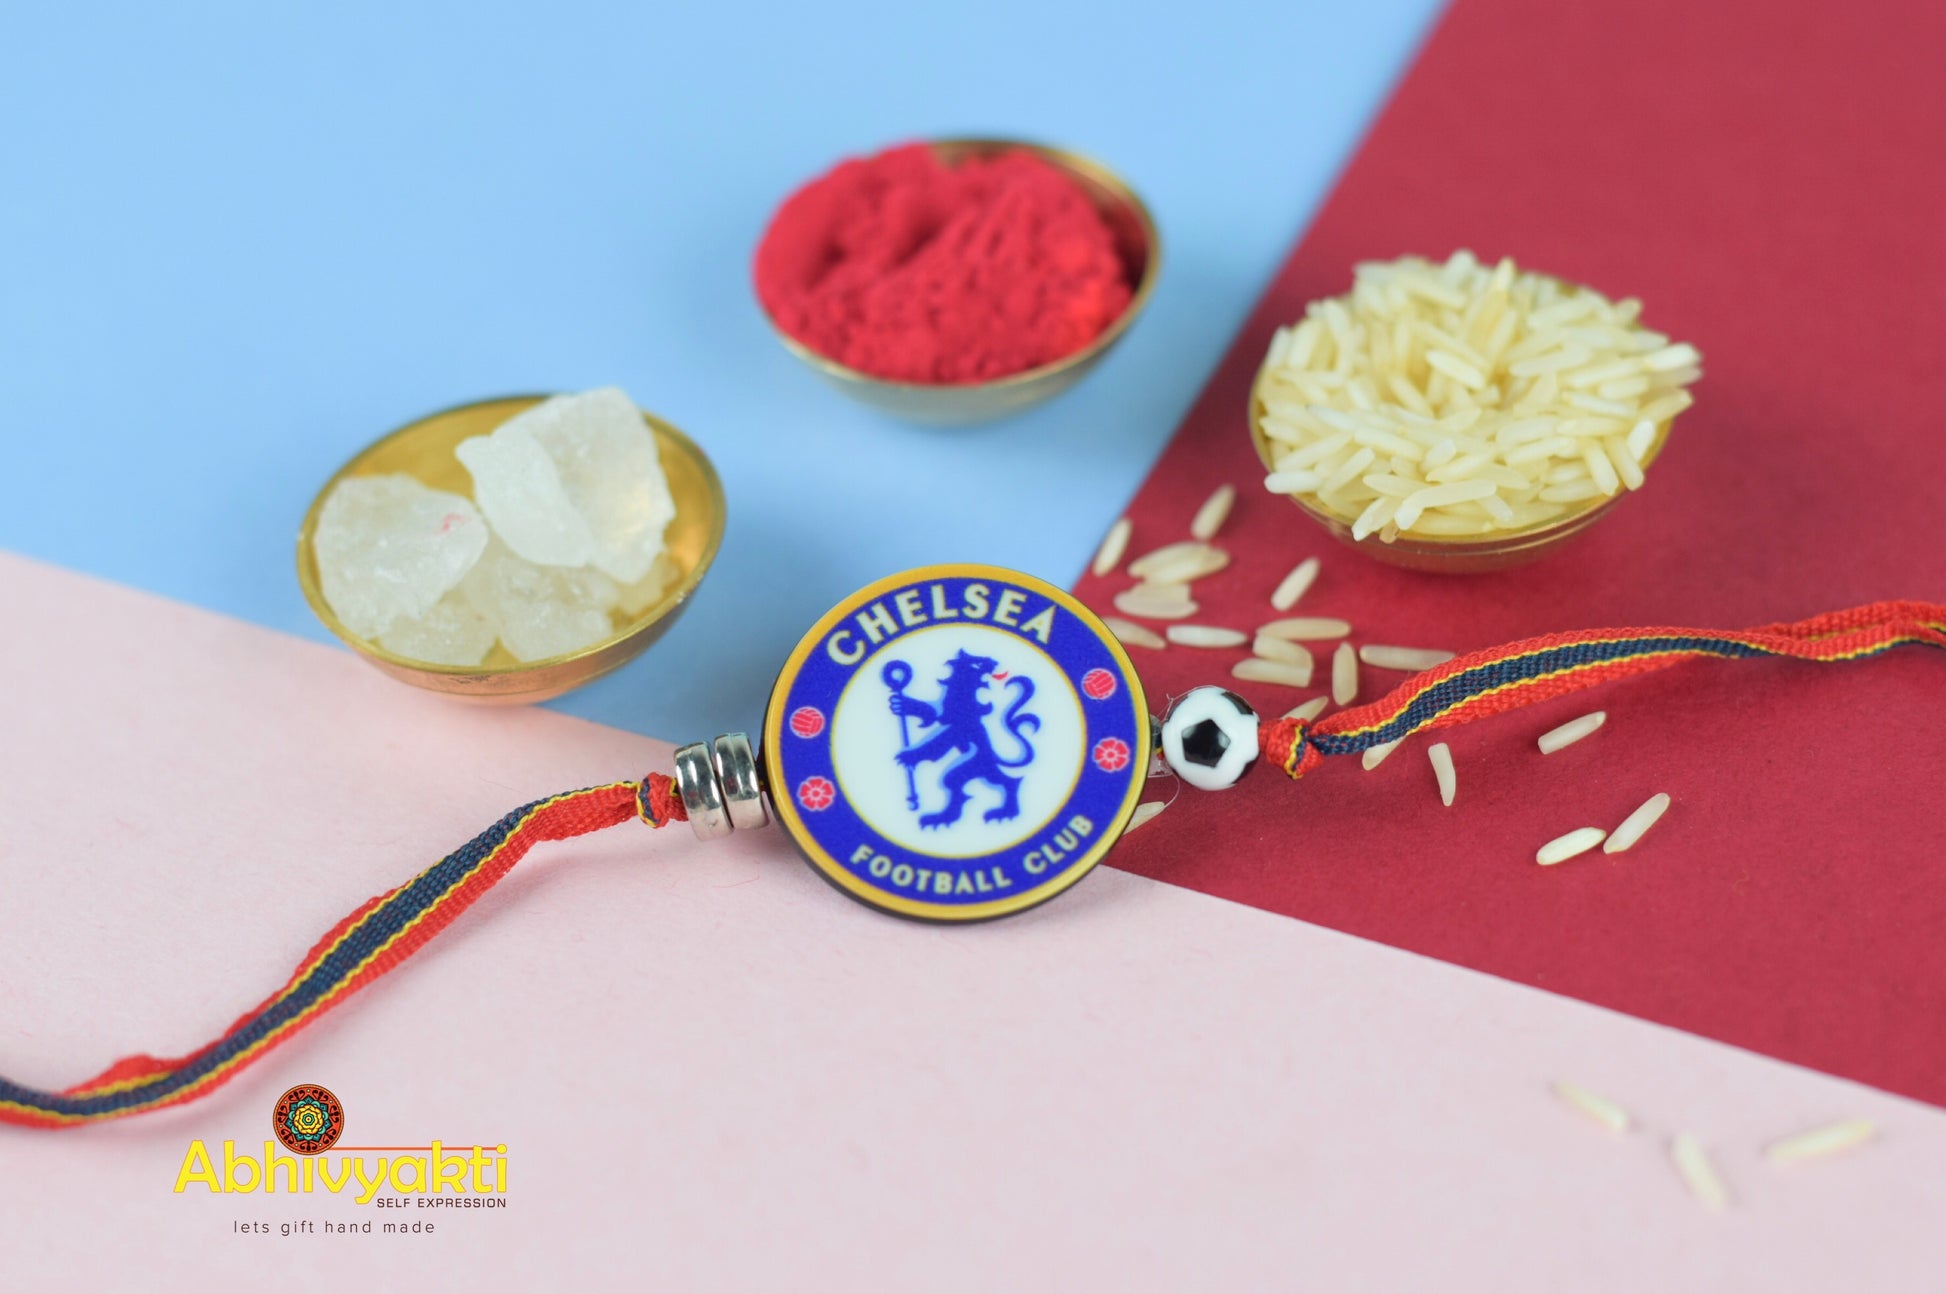 A kids Rakhi with beautiful beads and a Chelsea badge, surrounded by roli and rice.